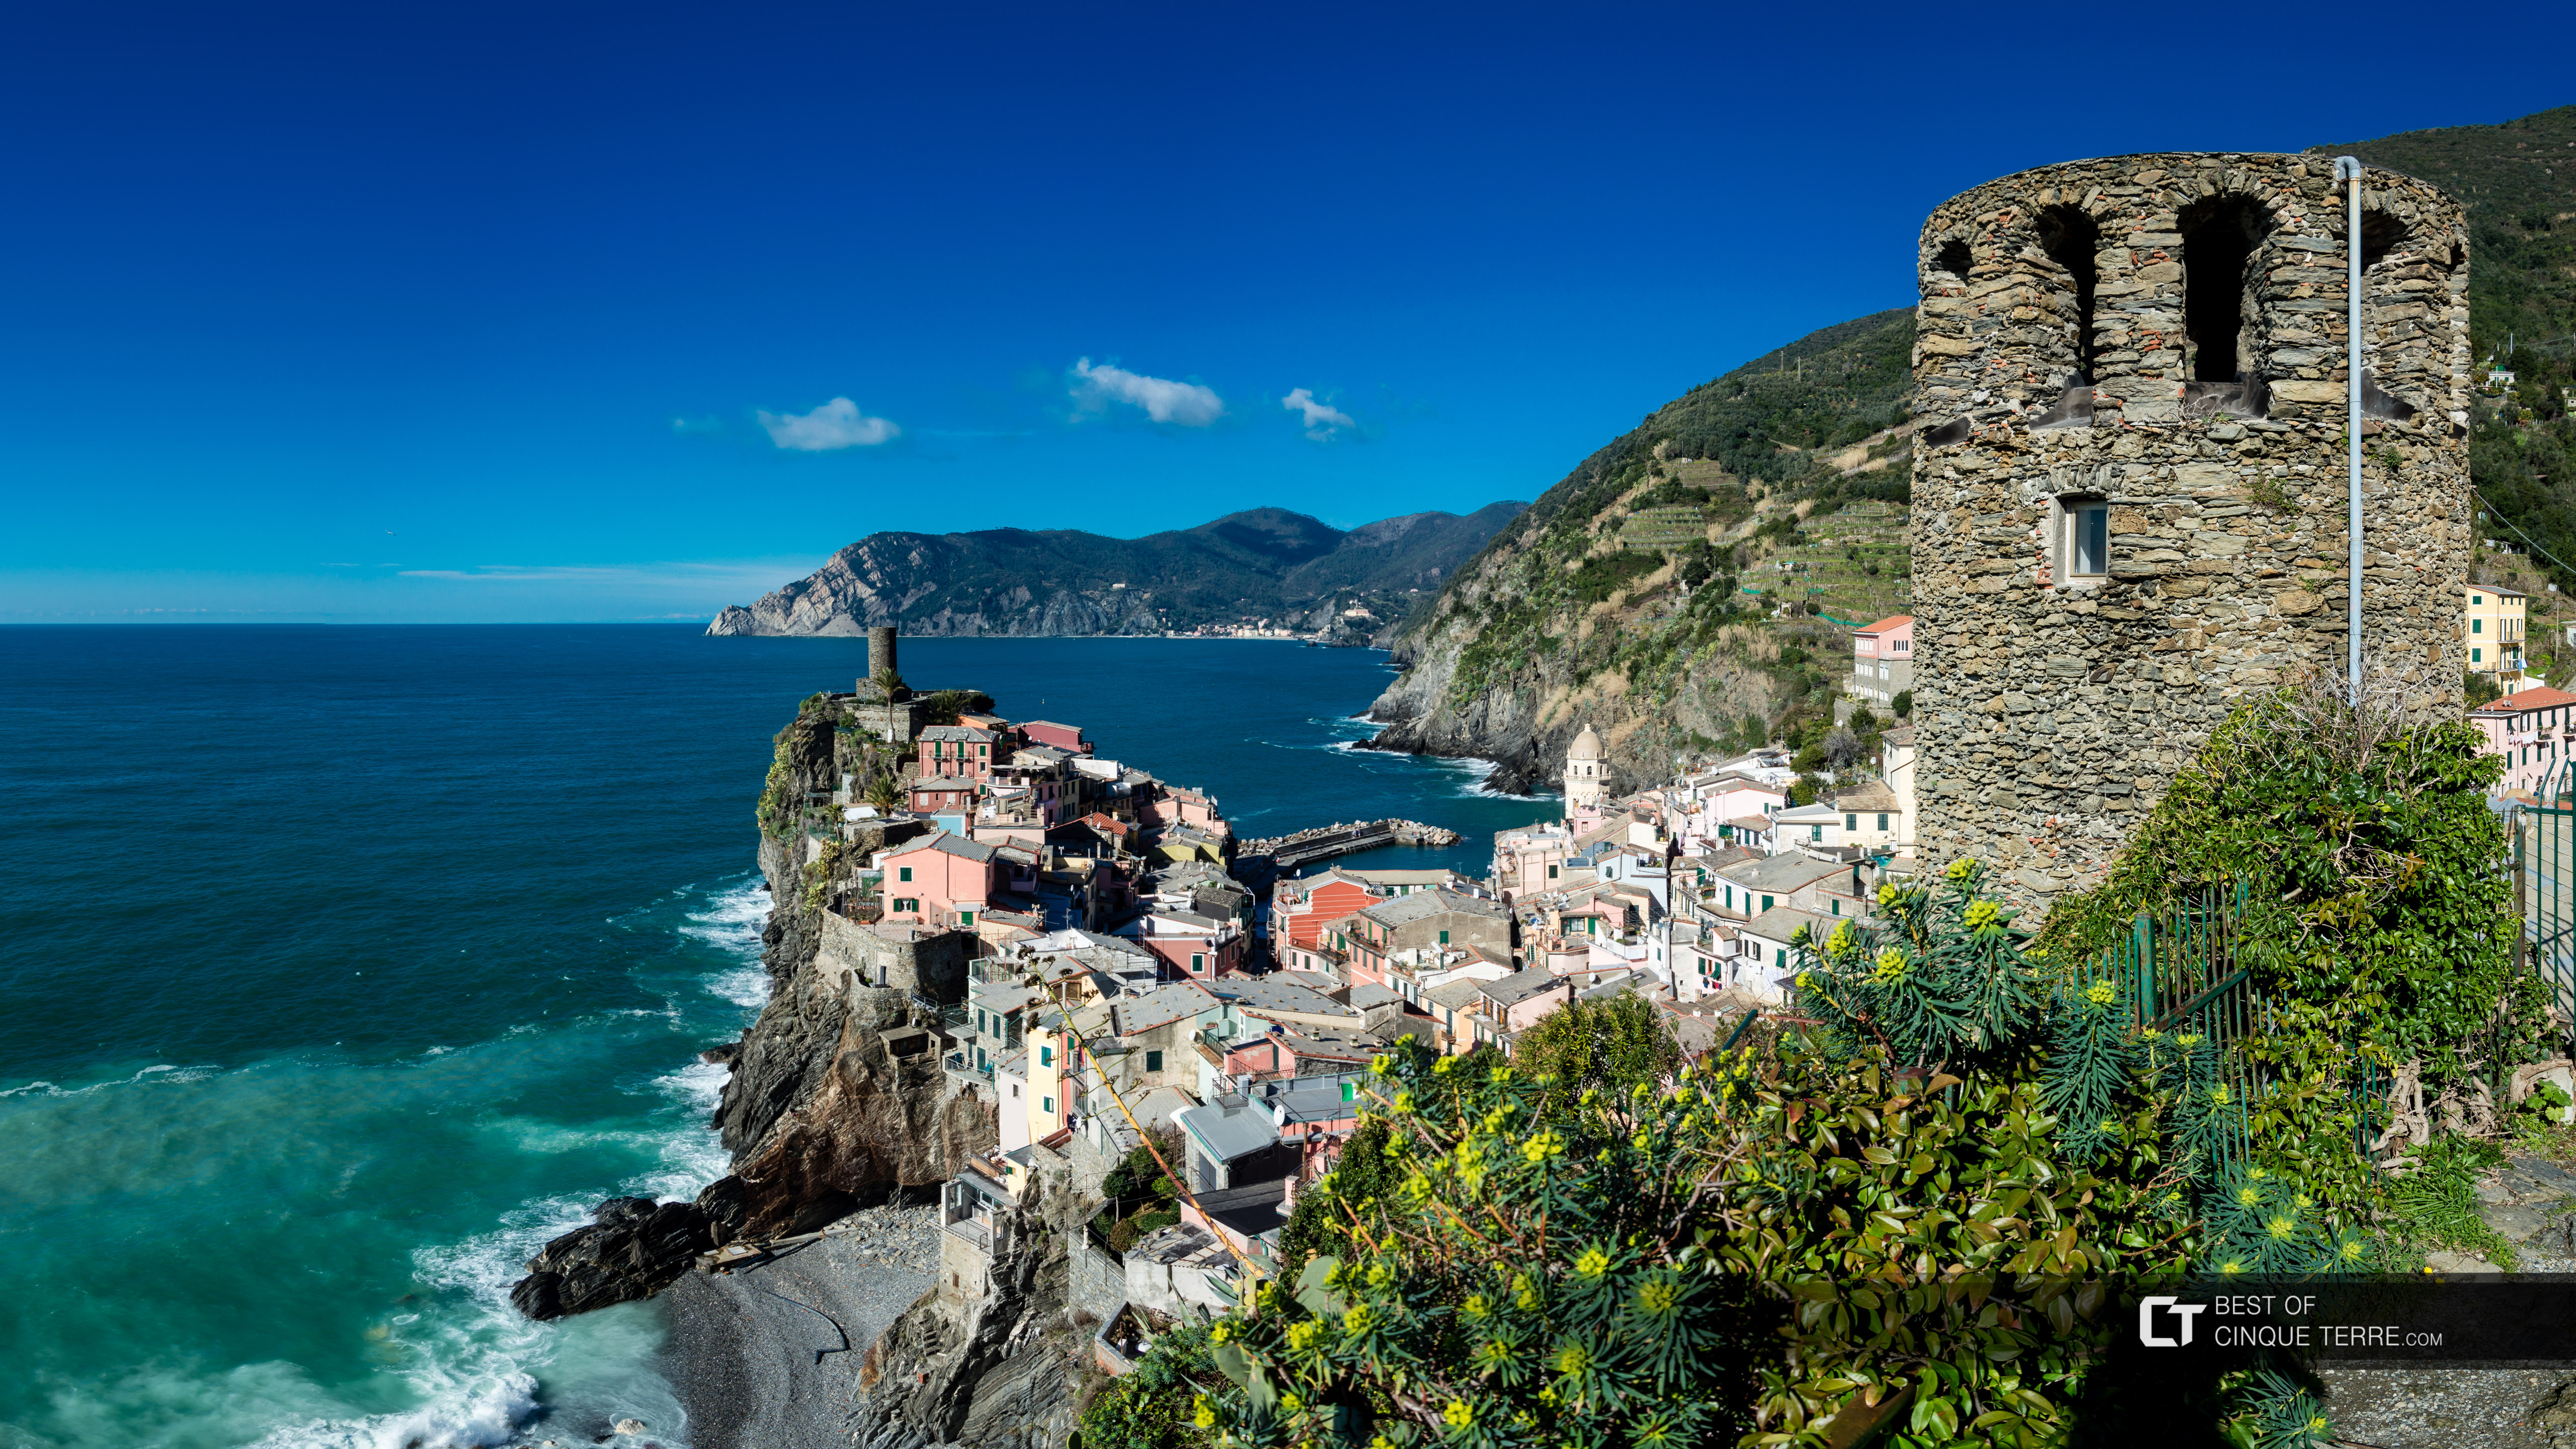 Panoramic view of the village from the Blue Trail, Vernazza, Cinque Terre, Italy